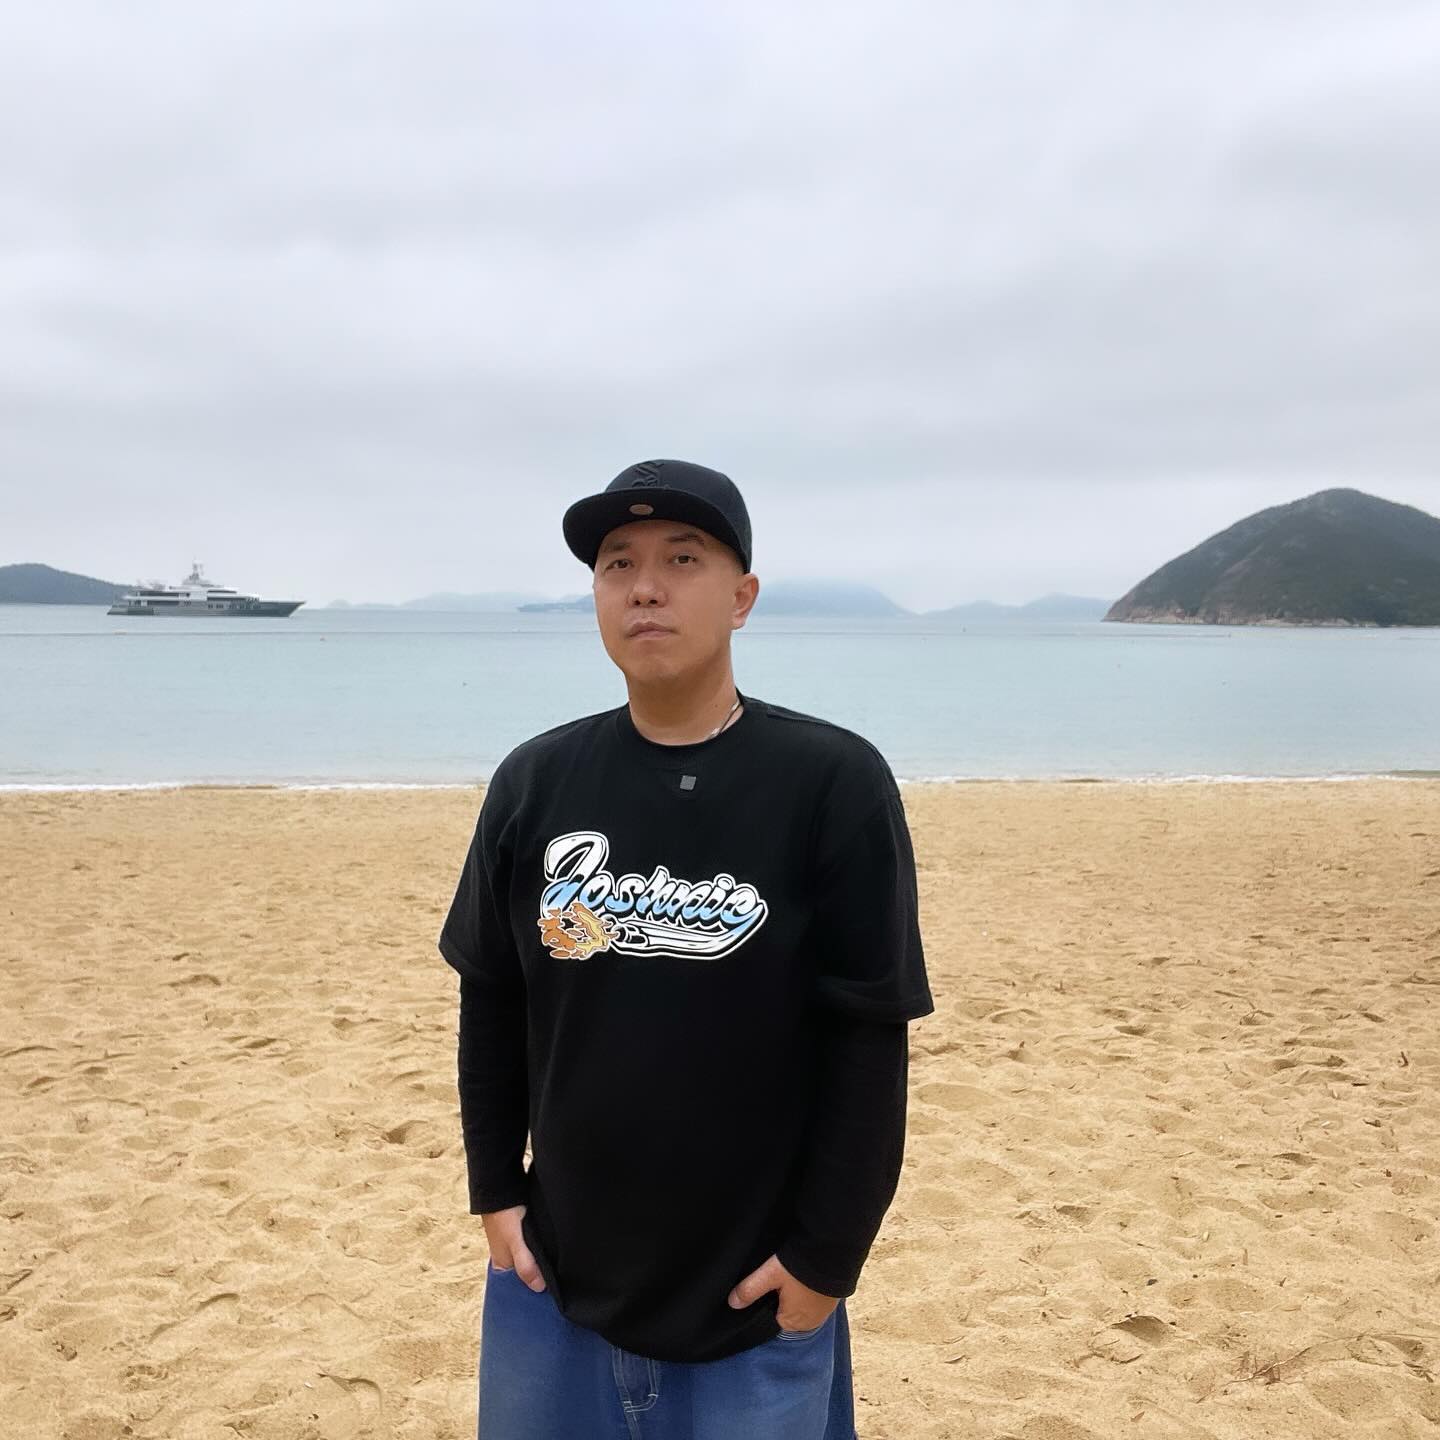 Besides Central, have to come to the beach while I’m in town. Finished shooting the CNY greeting video; will send it out on the 1st day of the Year of the Dragon. #CNY2024